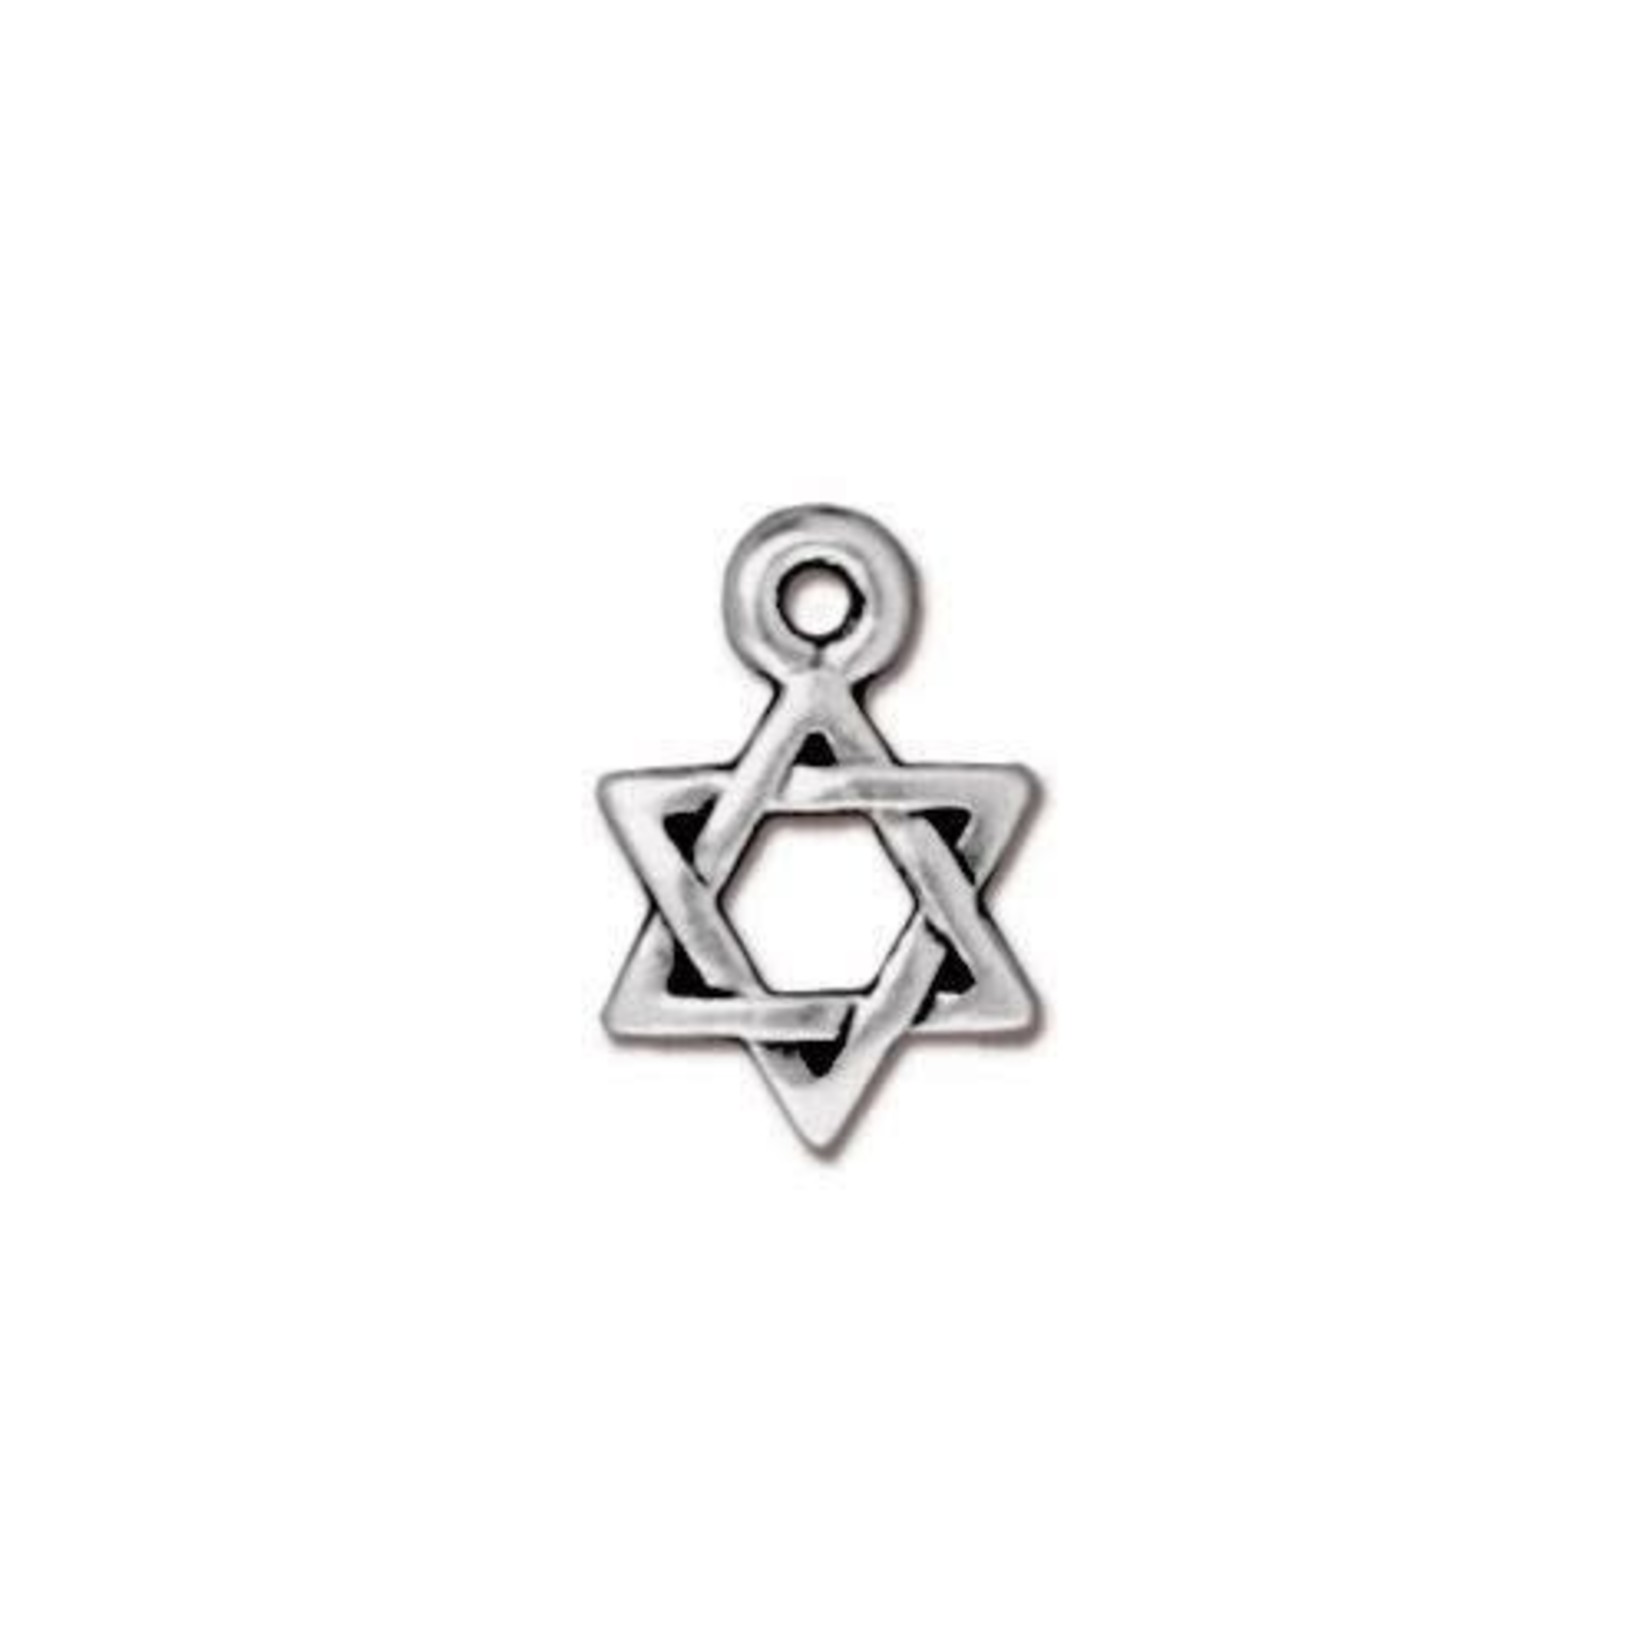 TierraCast Tierracast Antique Silver Plated Small Star of David Charm